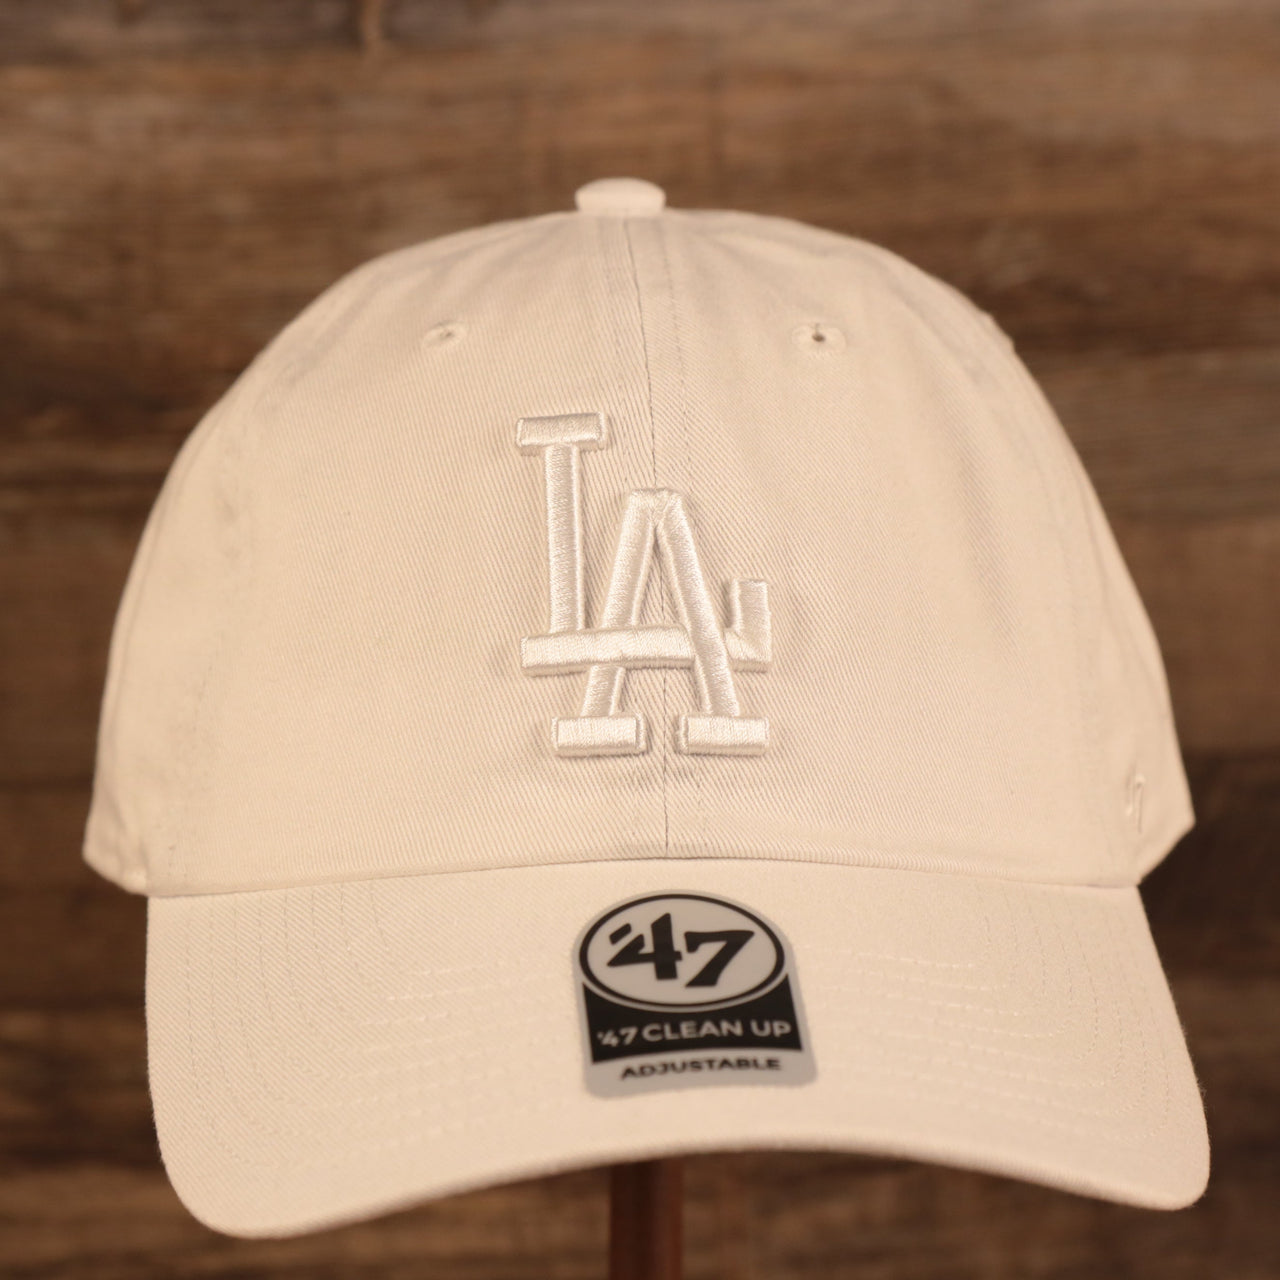 Los Angeles Dodgers Tie Dye Bottom White Clean Up Dad Hat  Up close front of the cap